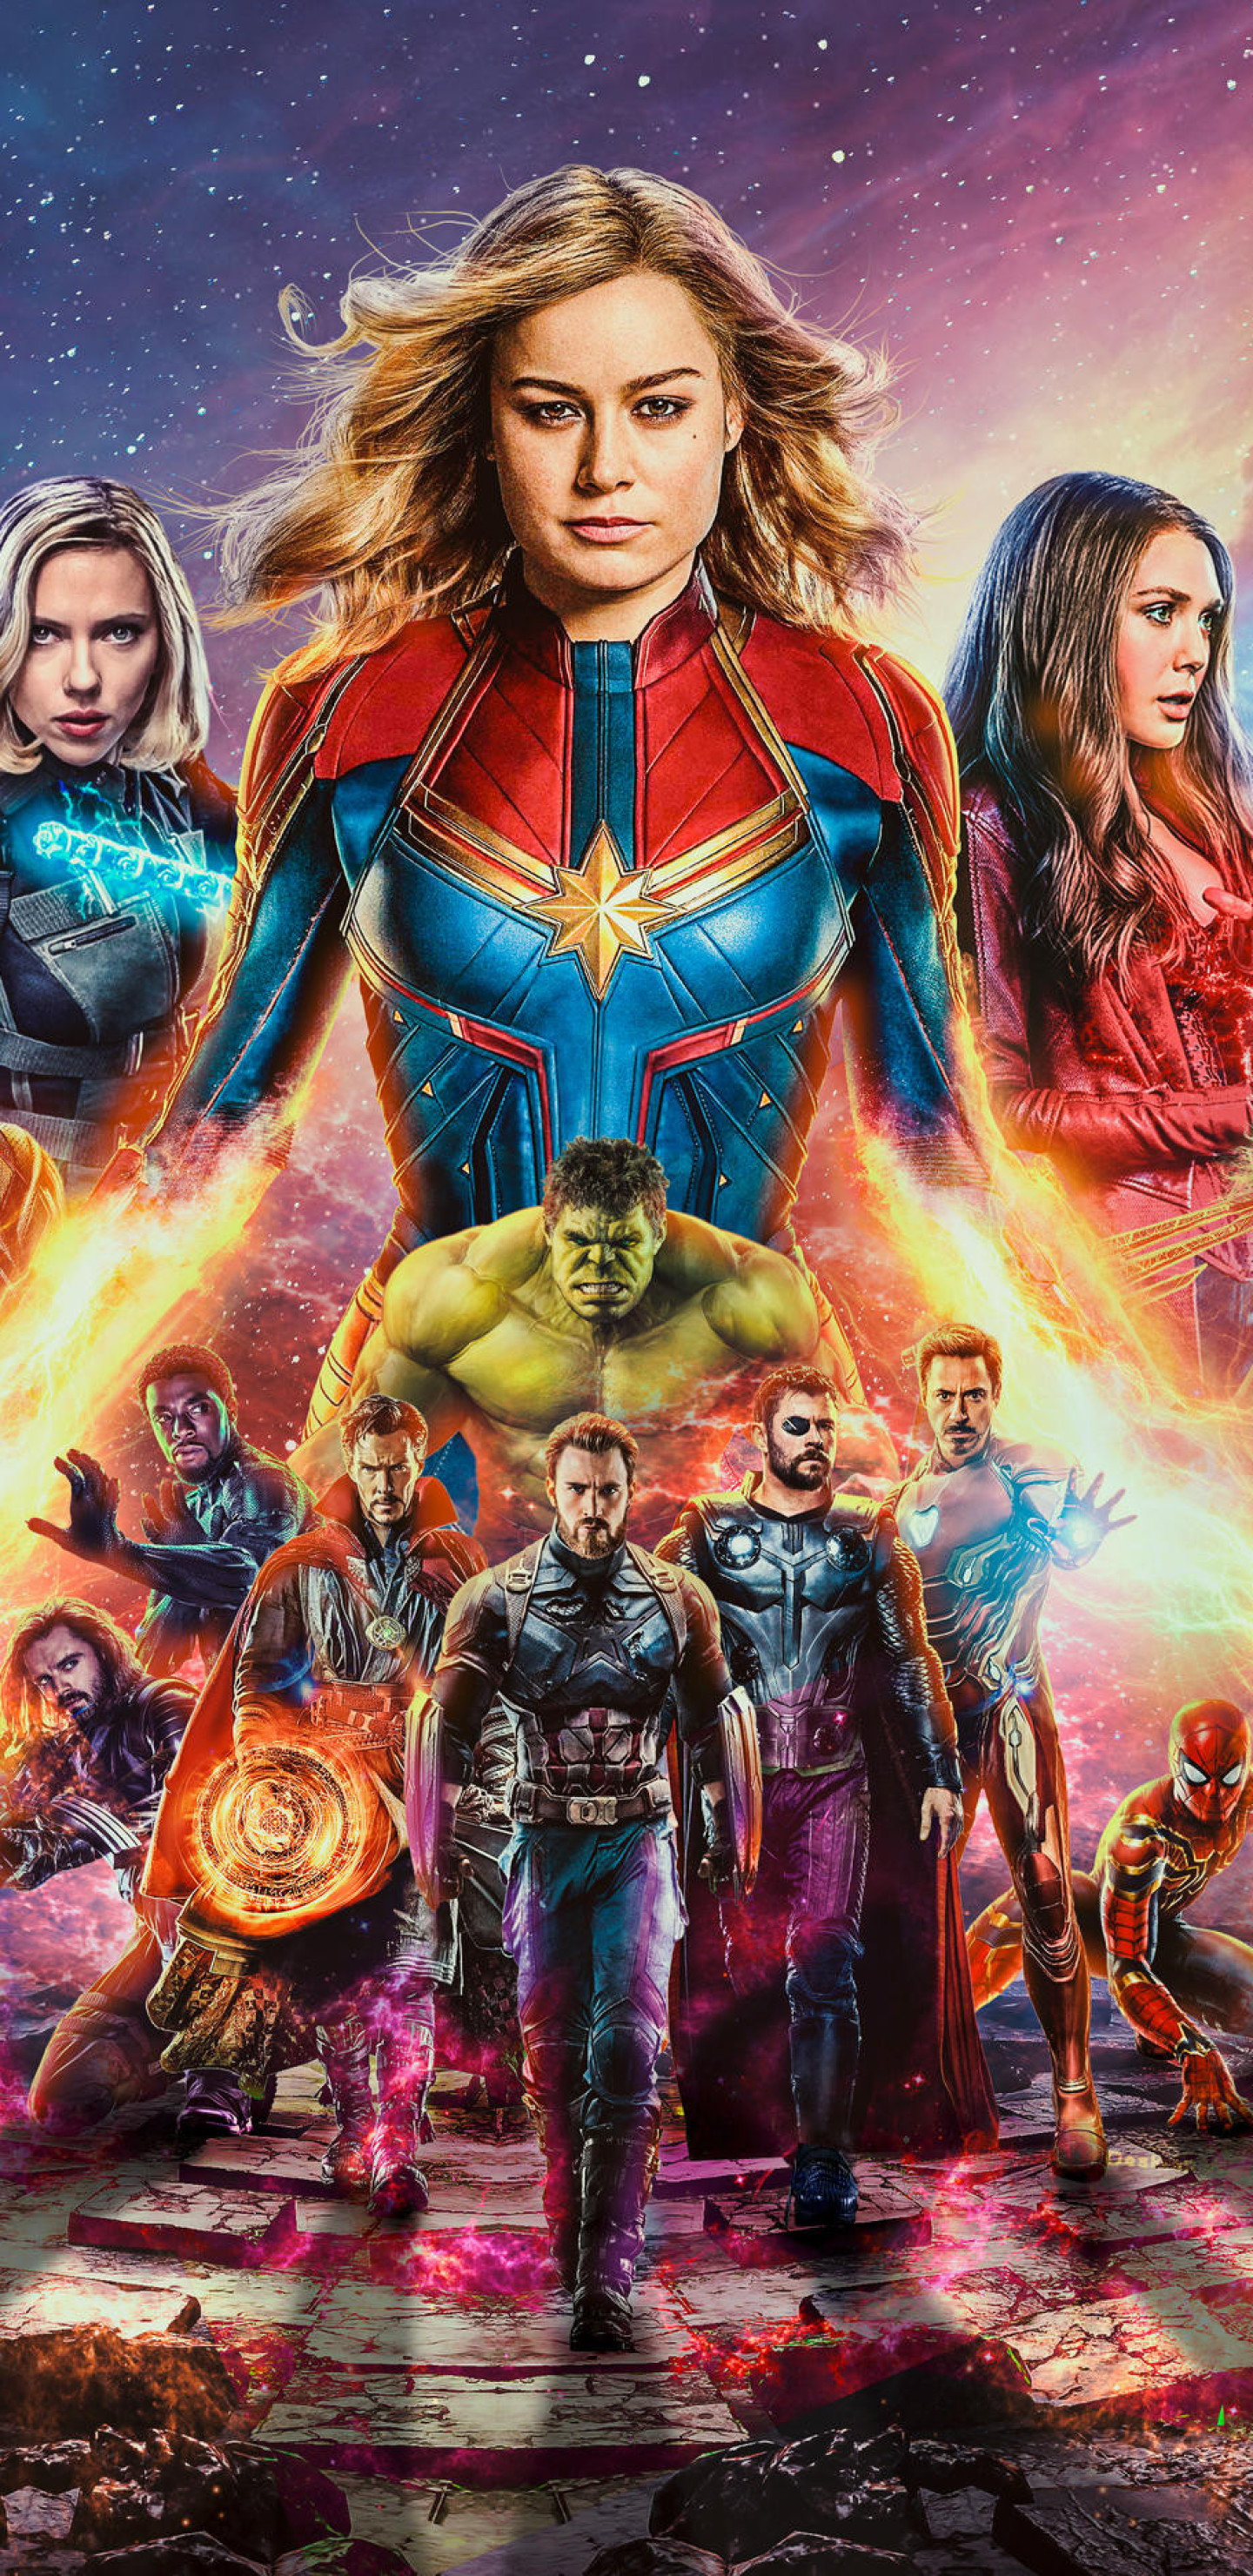 Avengers End Game Samsung Galaxy Note S S SQHD